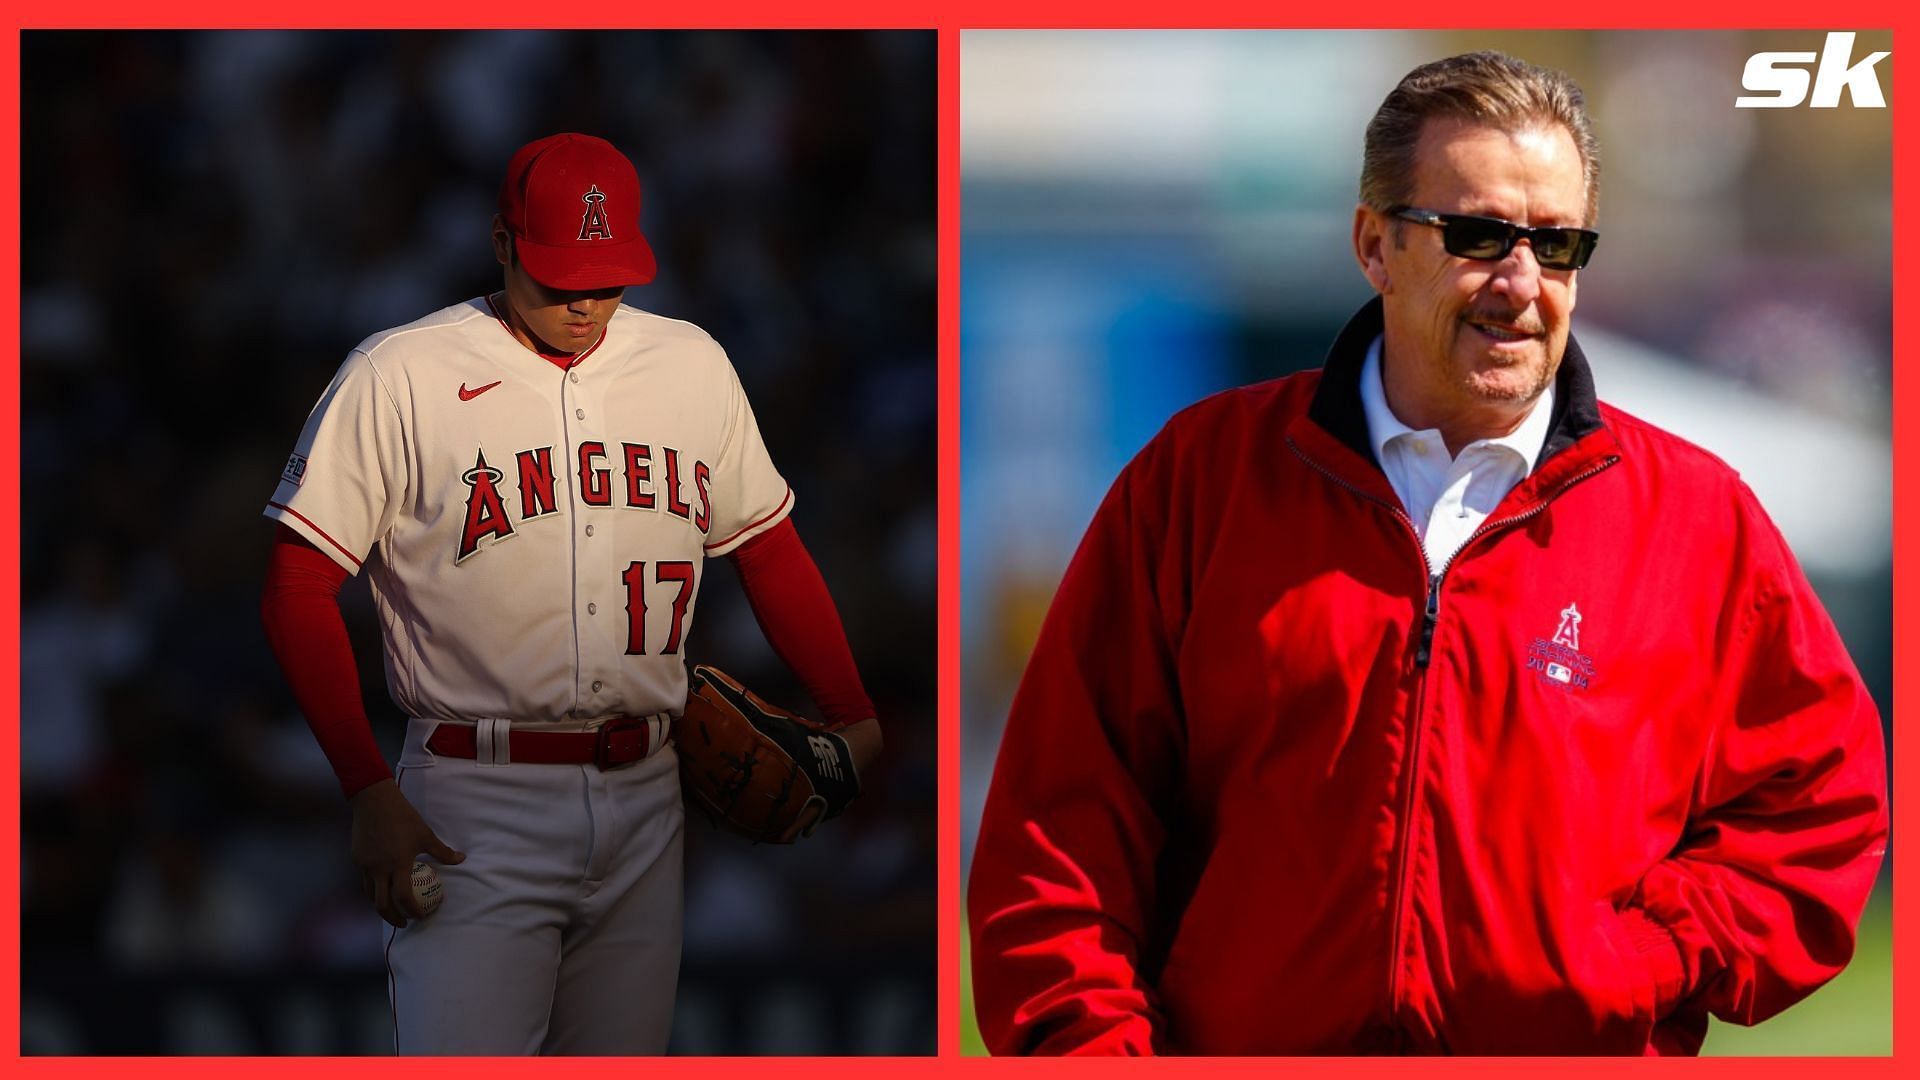 Will LA Angels owner Arte Moreno give the green light to trade Shohei Ohtani?